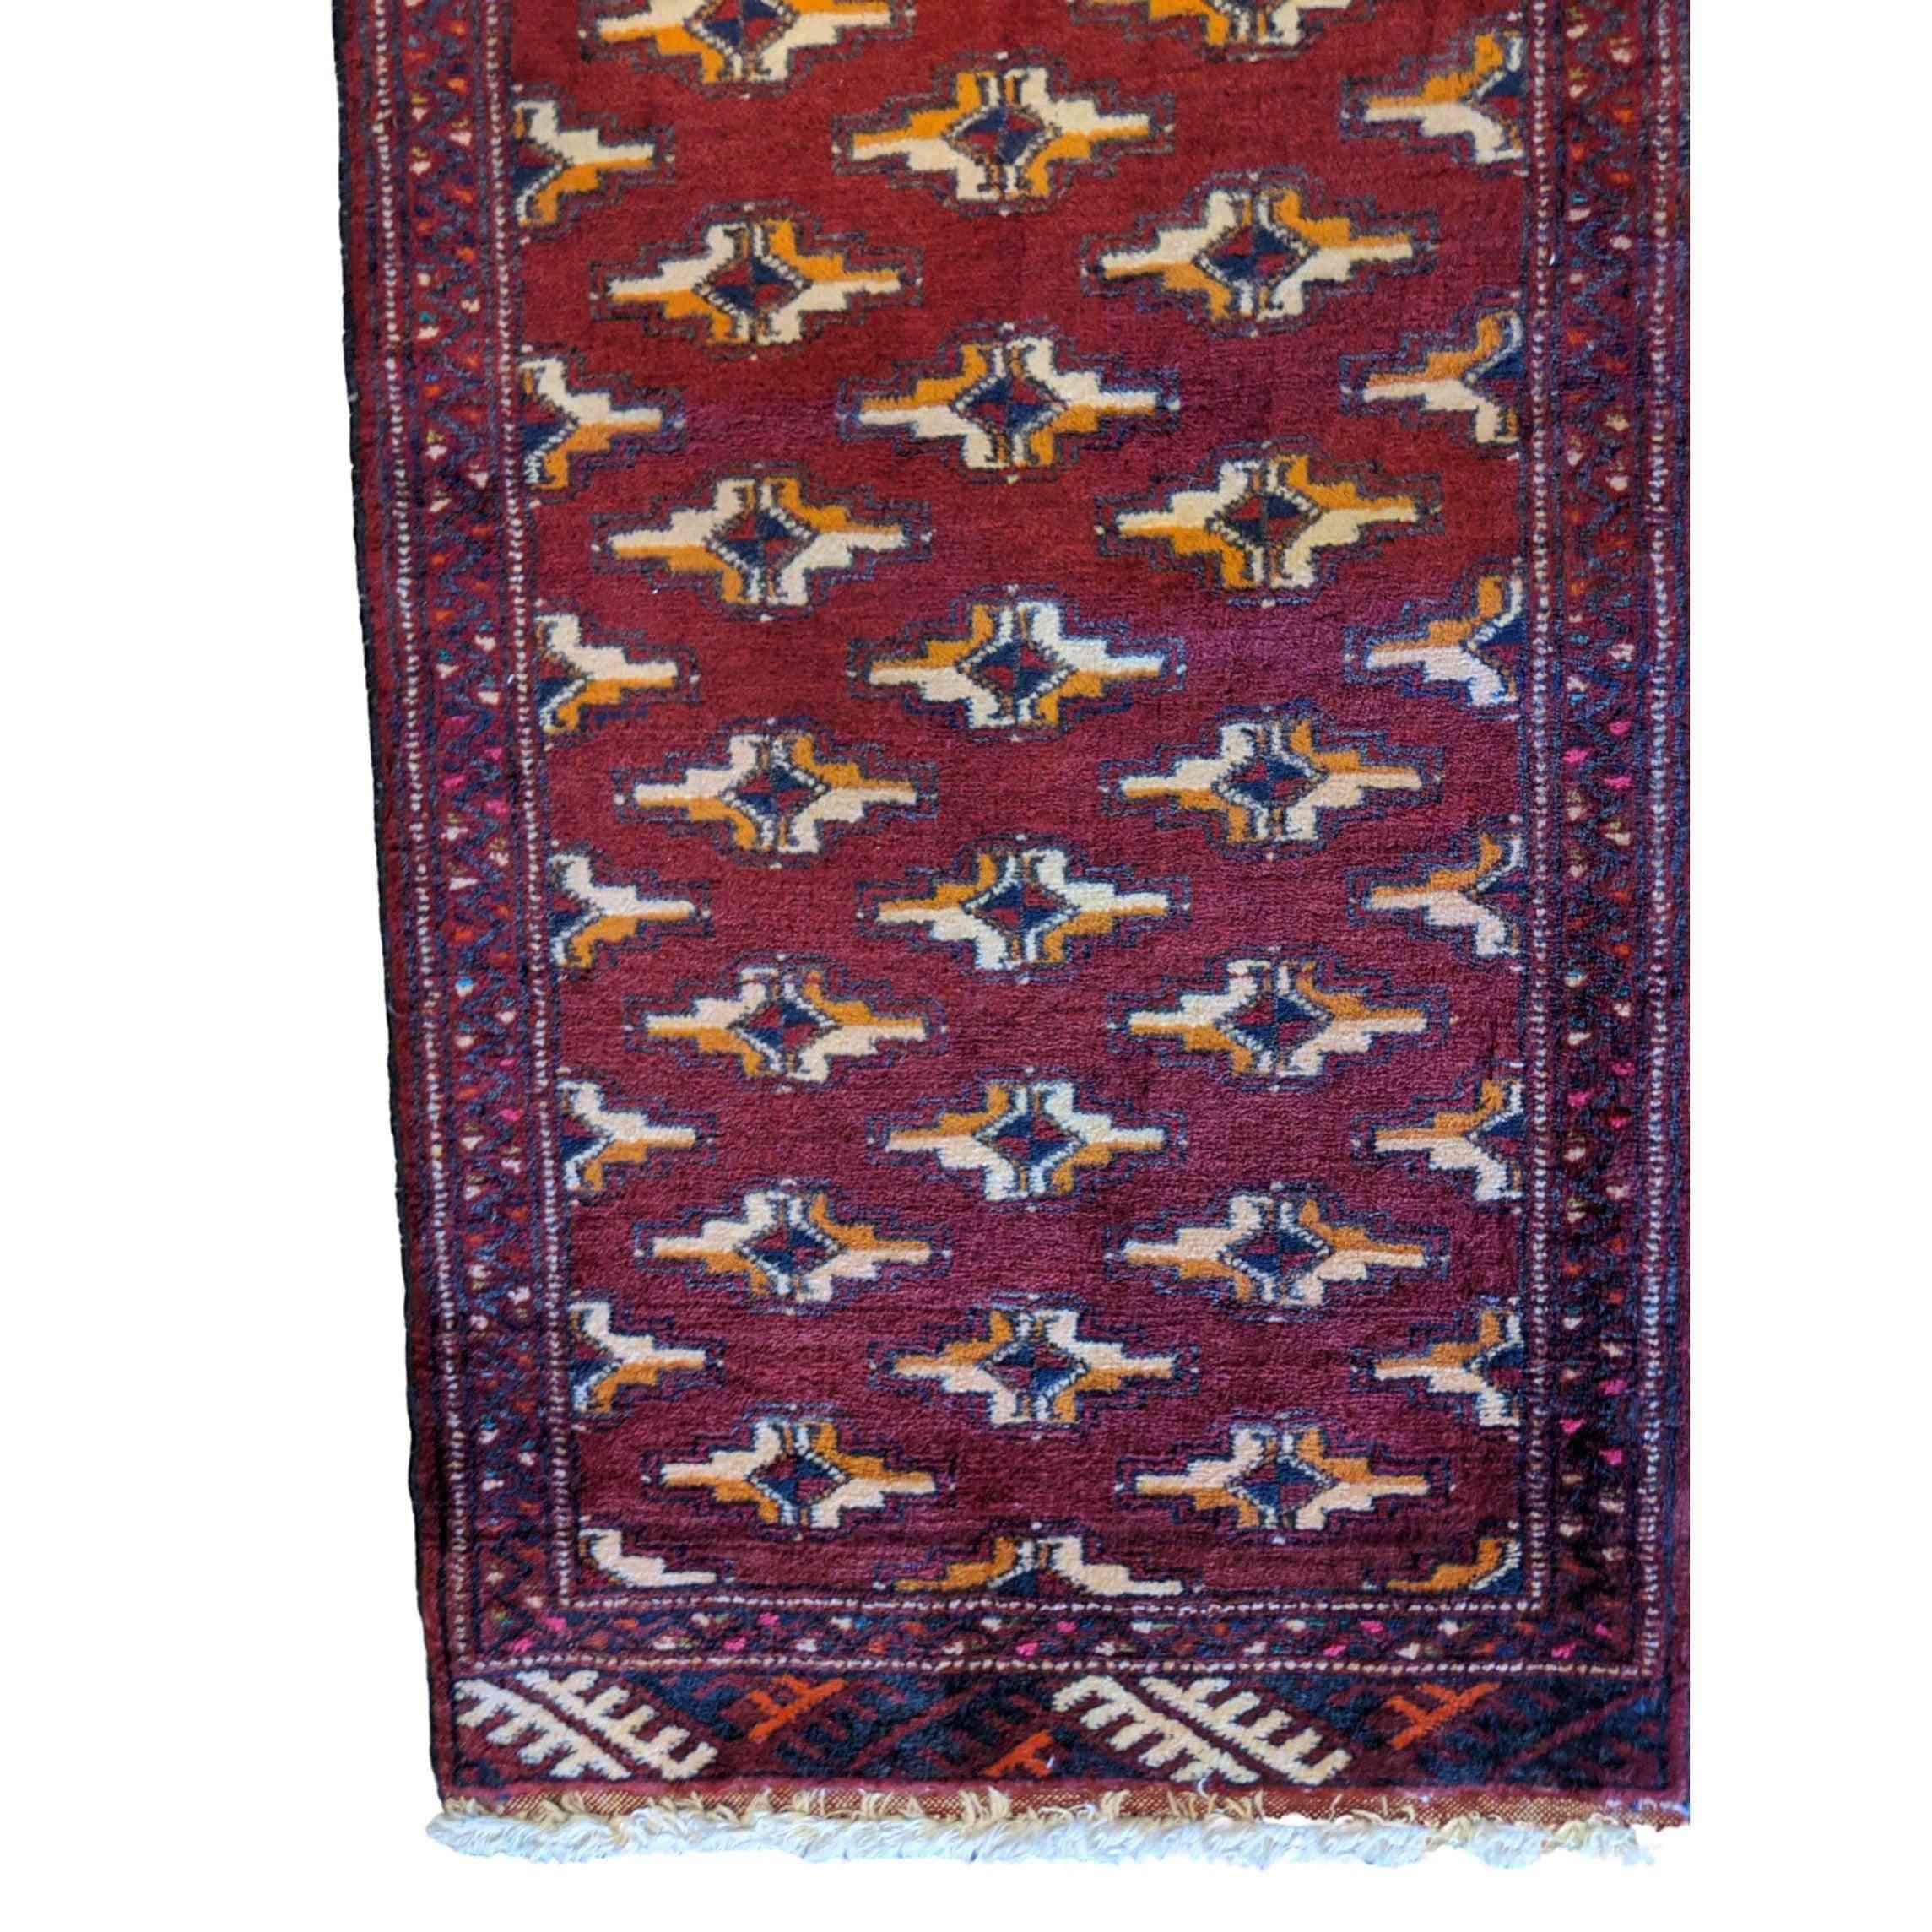 110 x 50 cm Persian Baluch Traditional Red Rug - Rugmaster